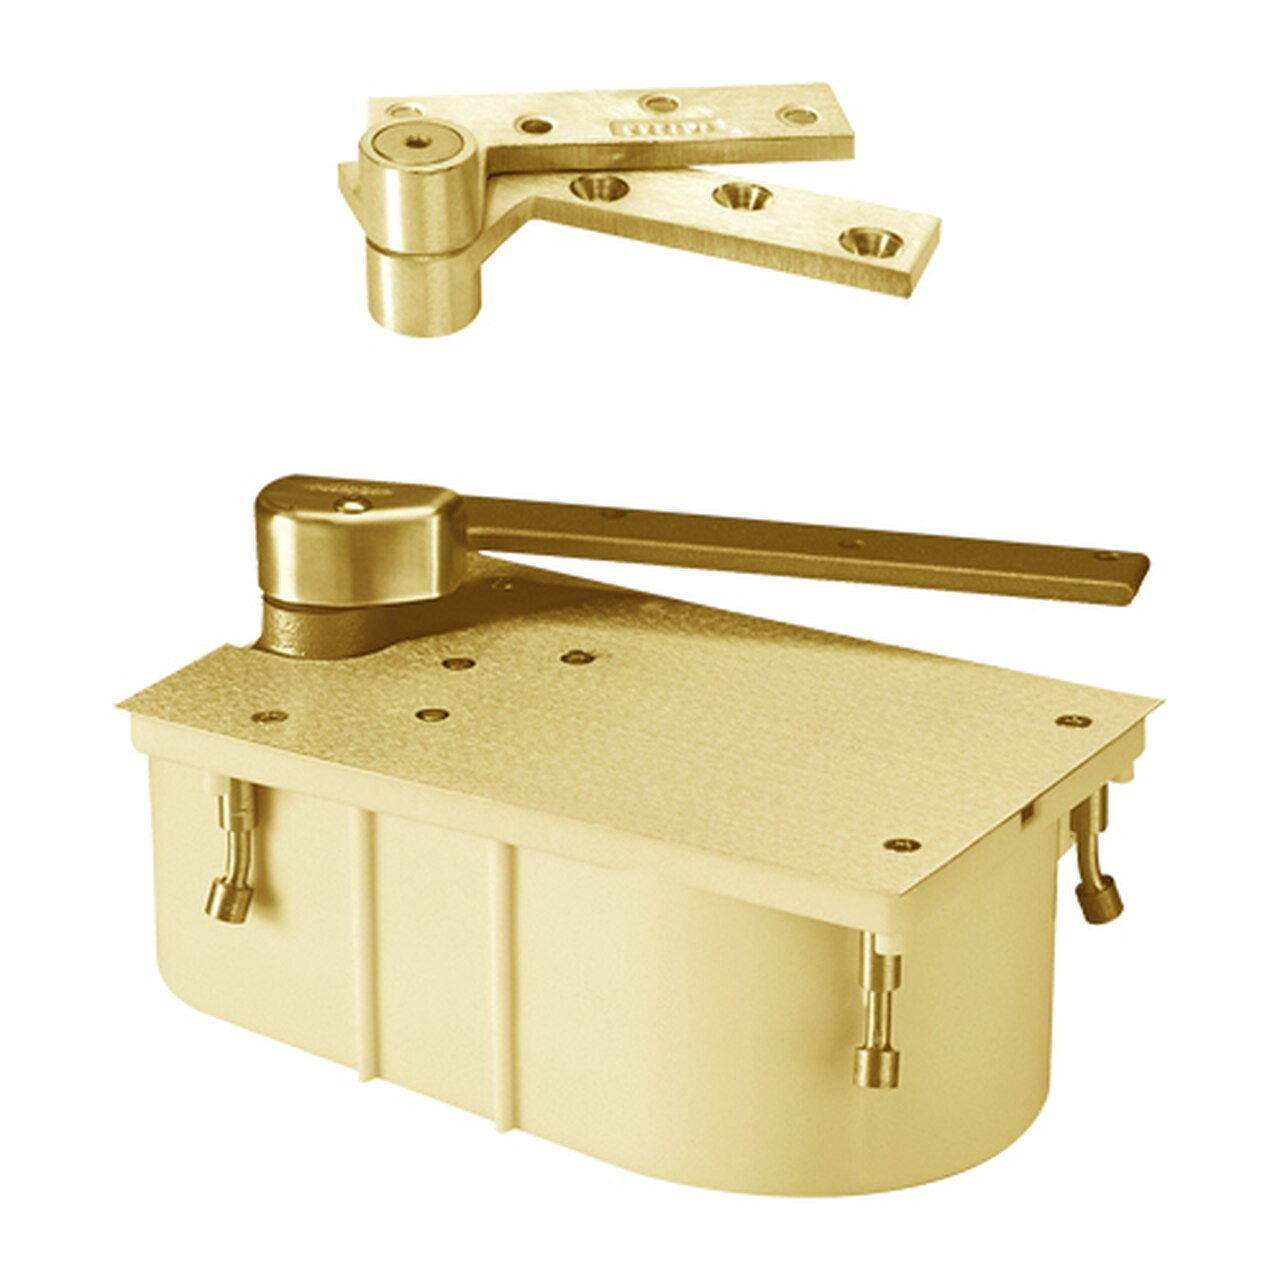 F27-95N-LFP-CWF-RH-605 Rixson 27 Series Fire Rated Heavy Duty 3/4" Offset Hung Floor Closer in Bright Brass Finish